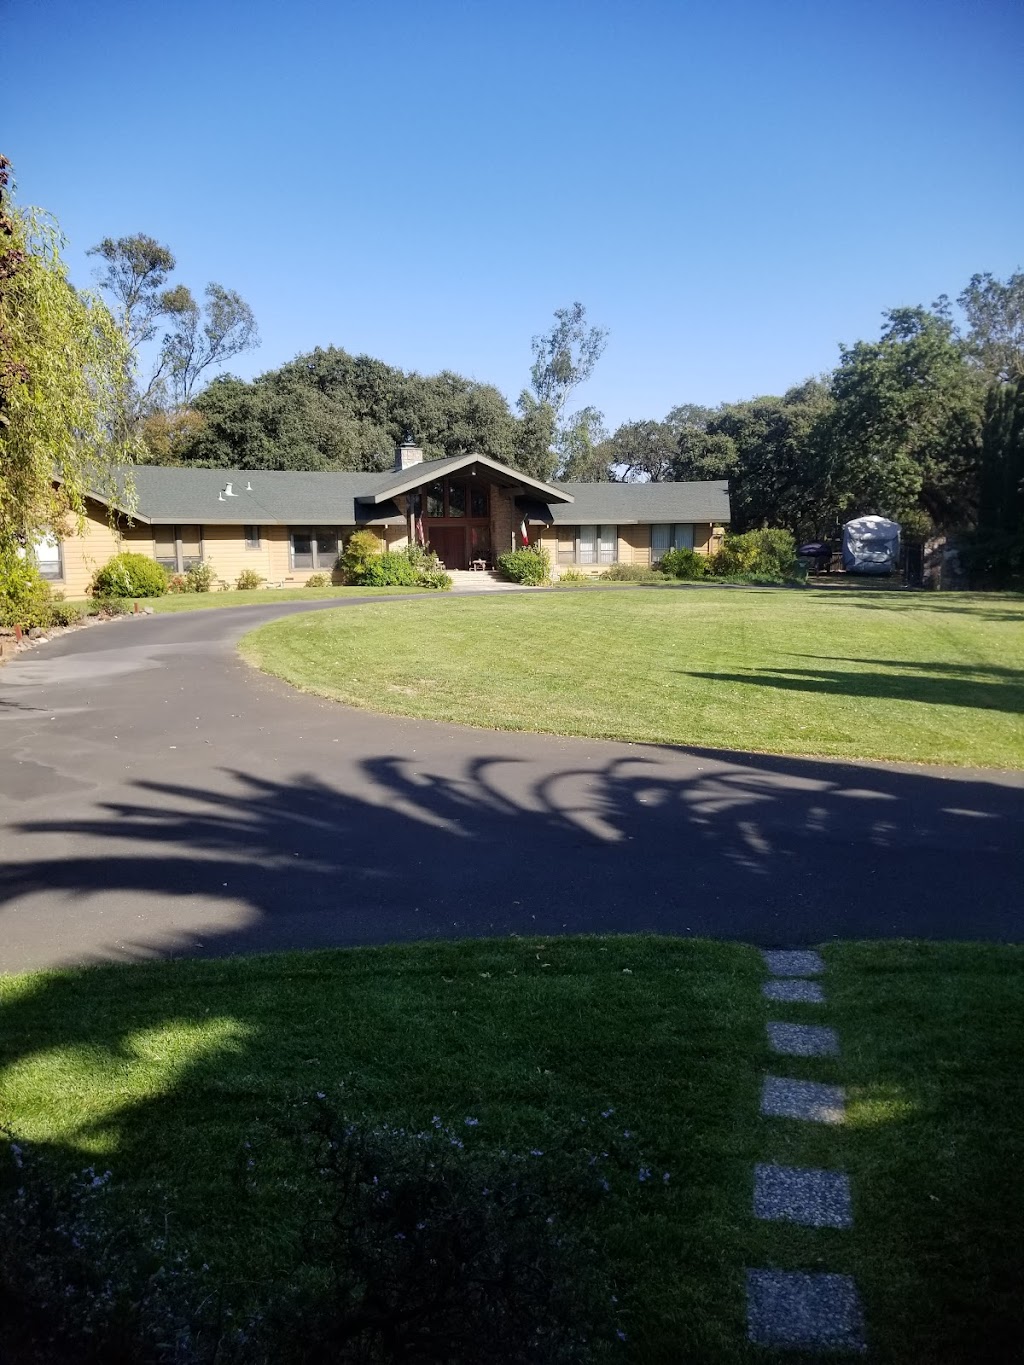 Cottage At Twin Oaks | 400 E Watmaugh Rd, Sonoma, CA 95476 | Phone: (707) 938-0754